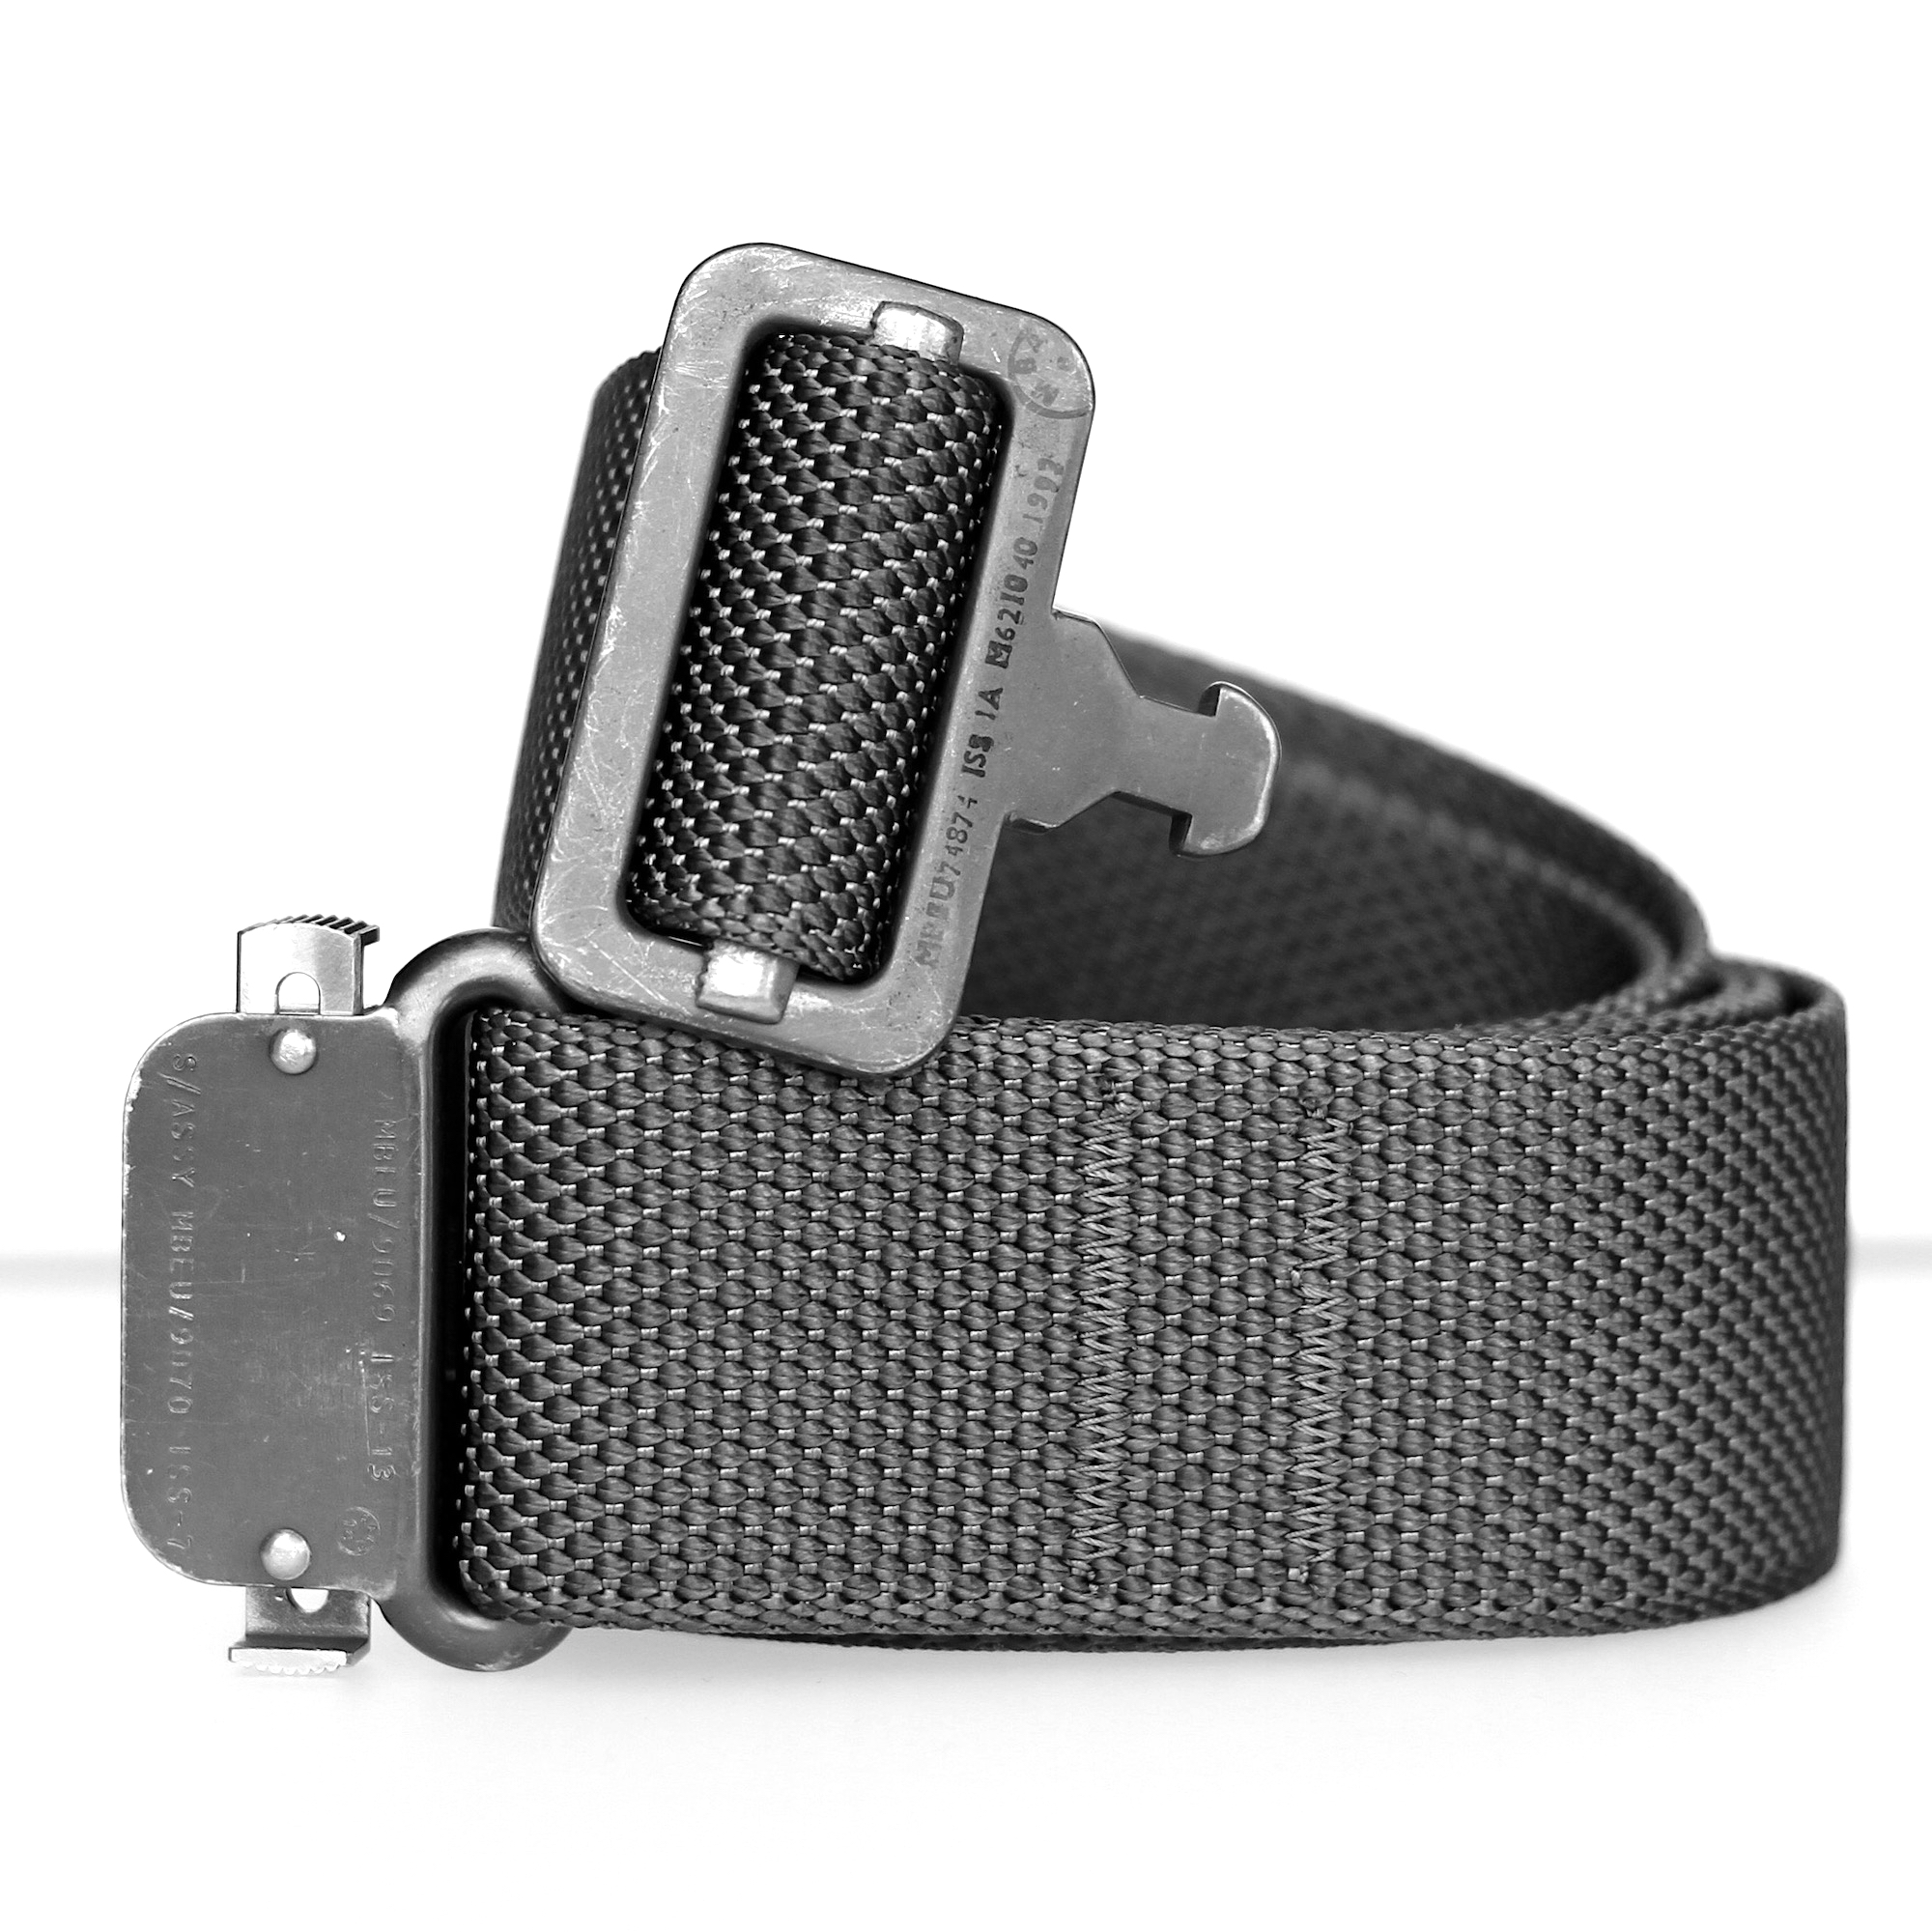 EDC Belts | Great EDC belts for outdoor pursuits, urban wear and CCW